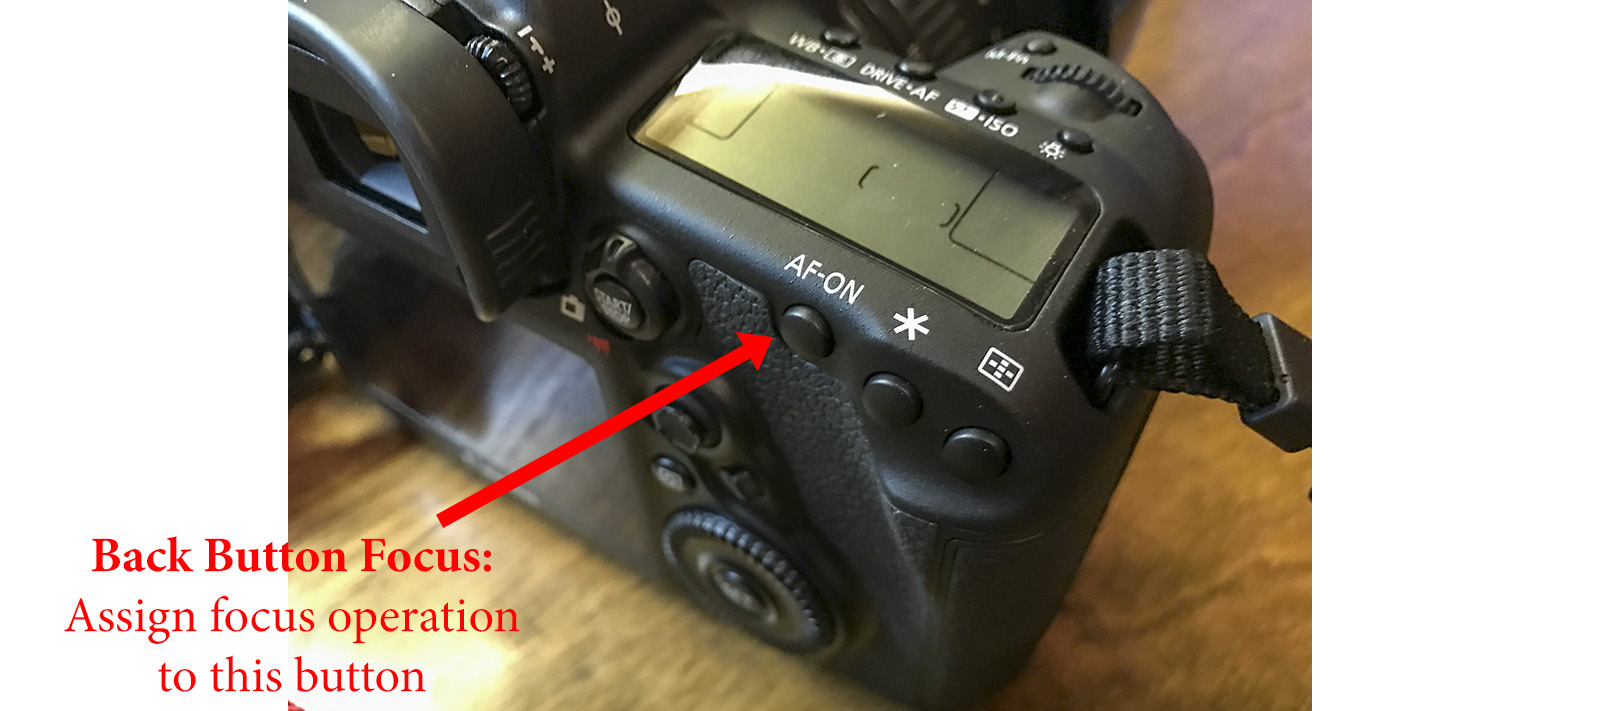 Photos of the button on the back of the camera used for back button focus